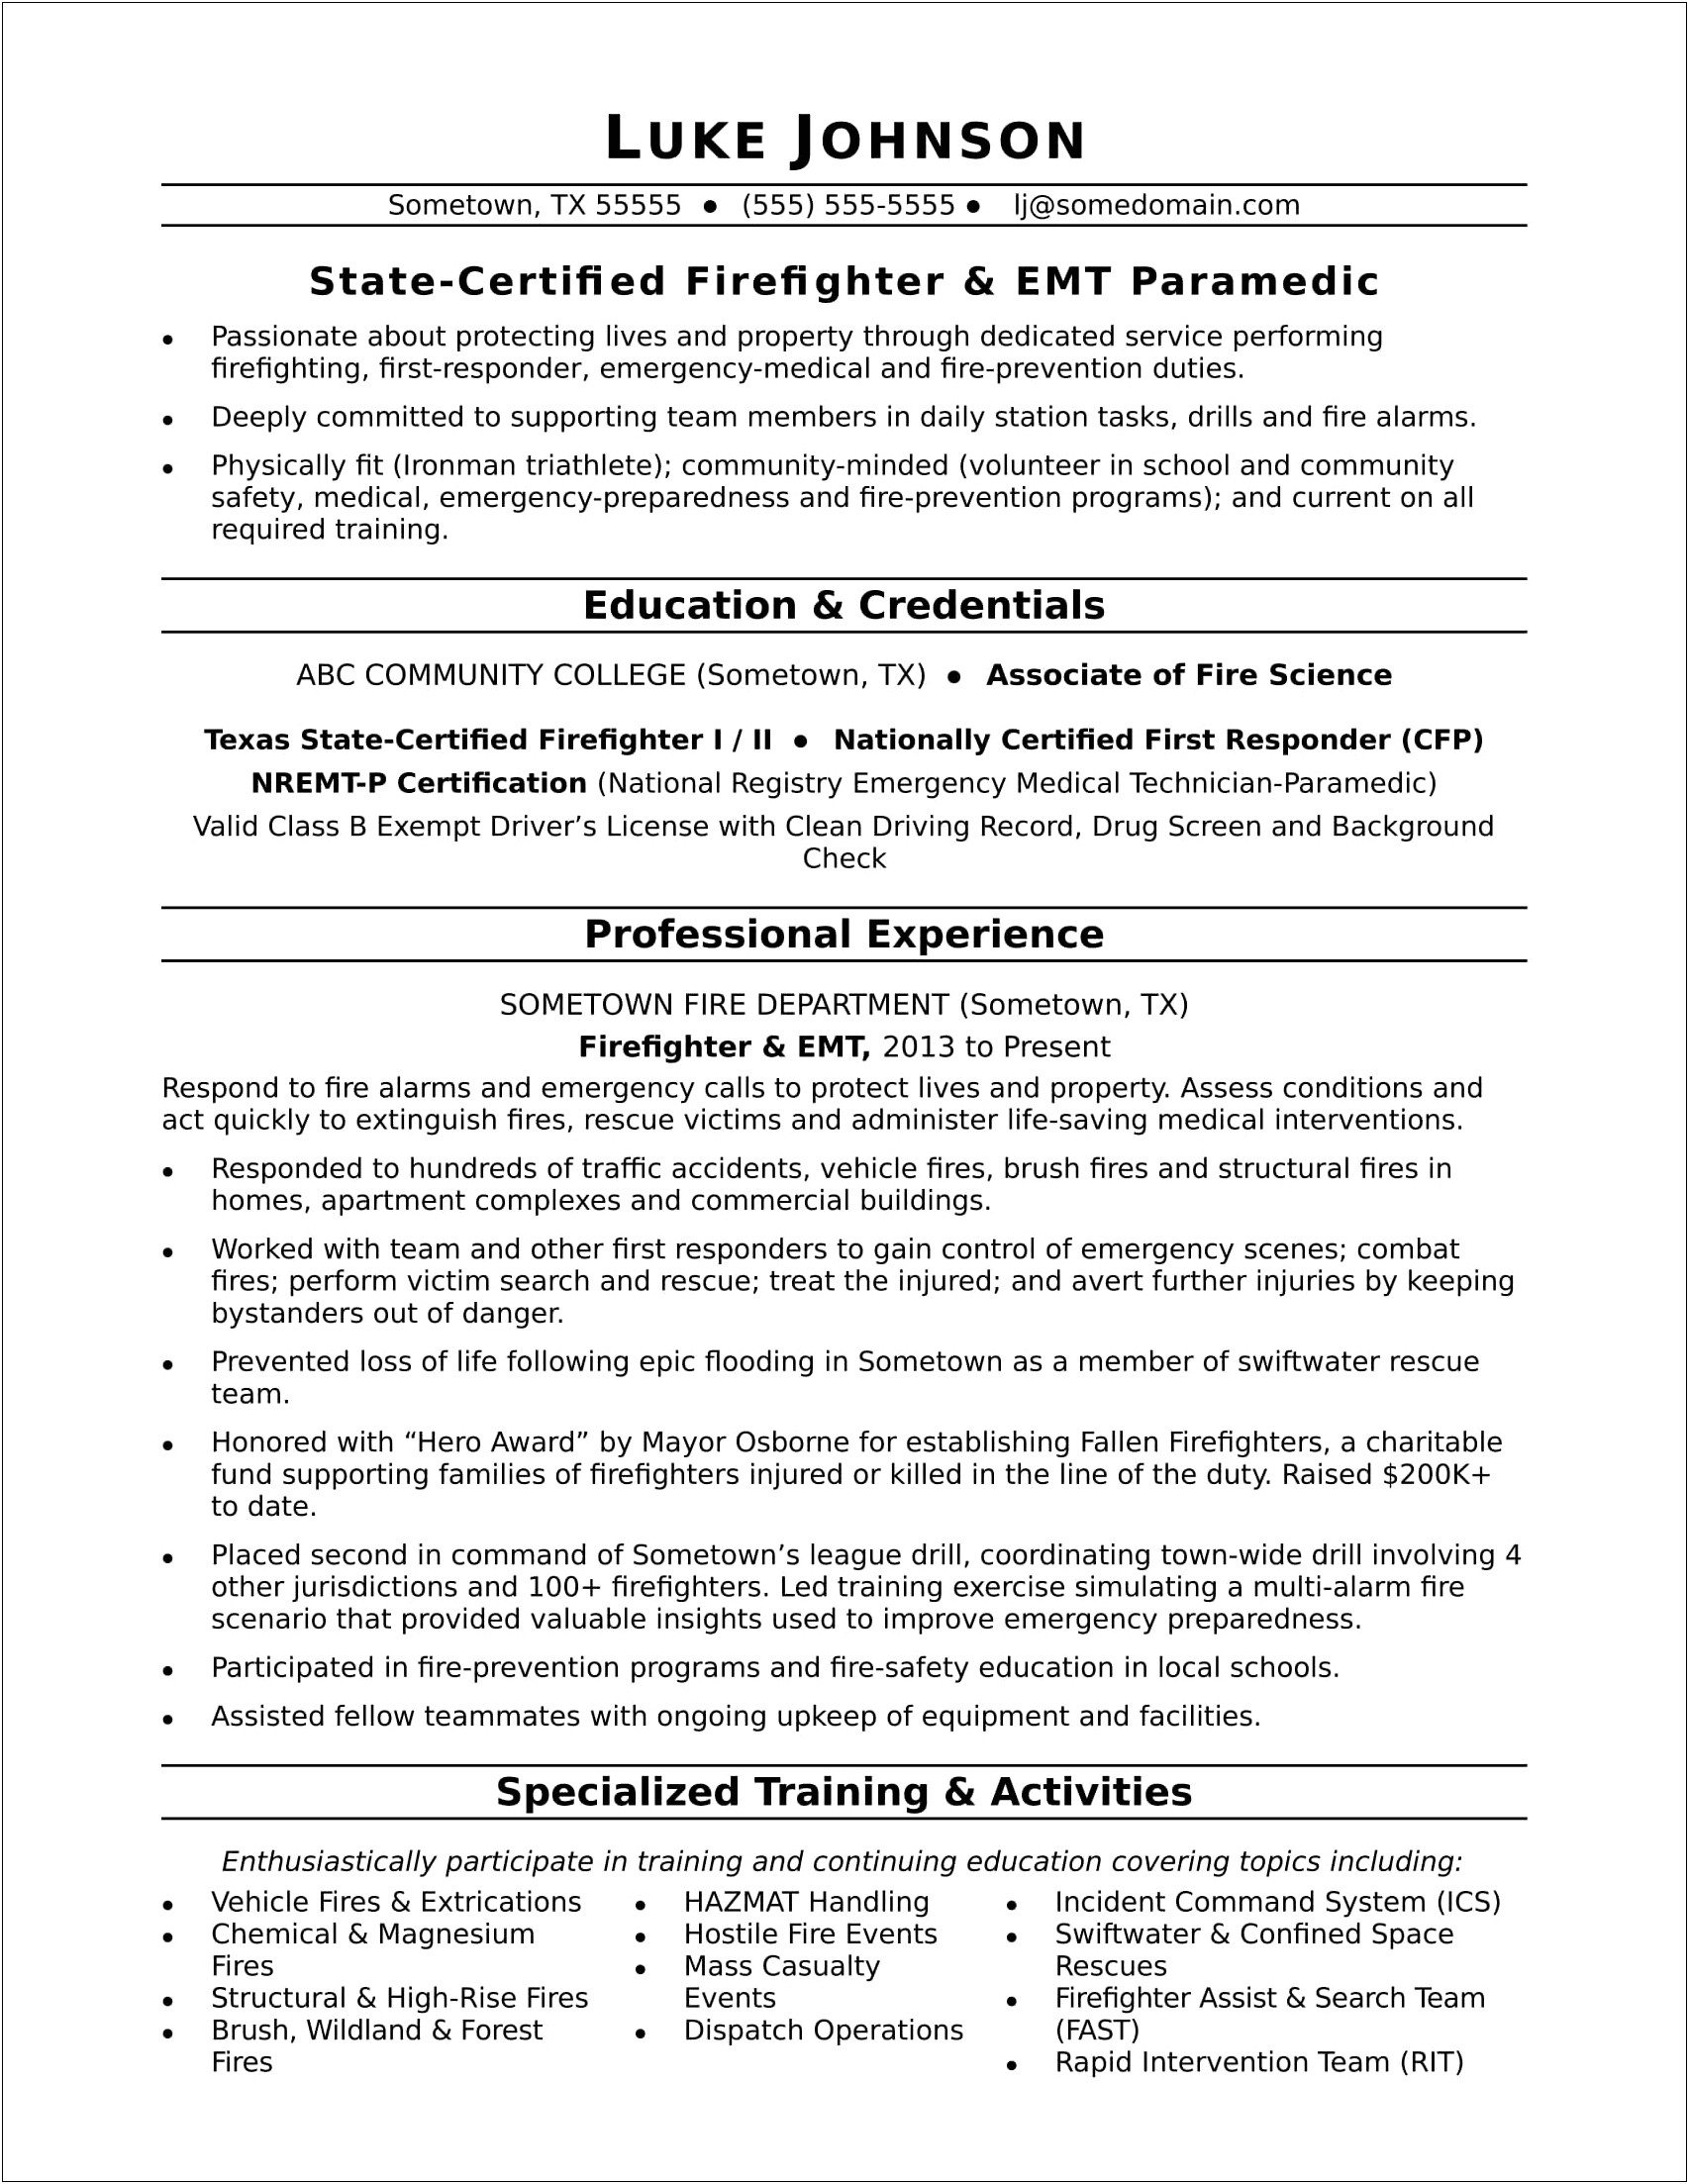 Example Resume With First Aid Certifications